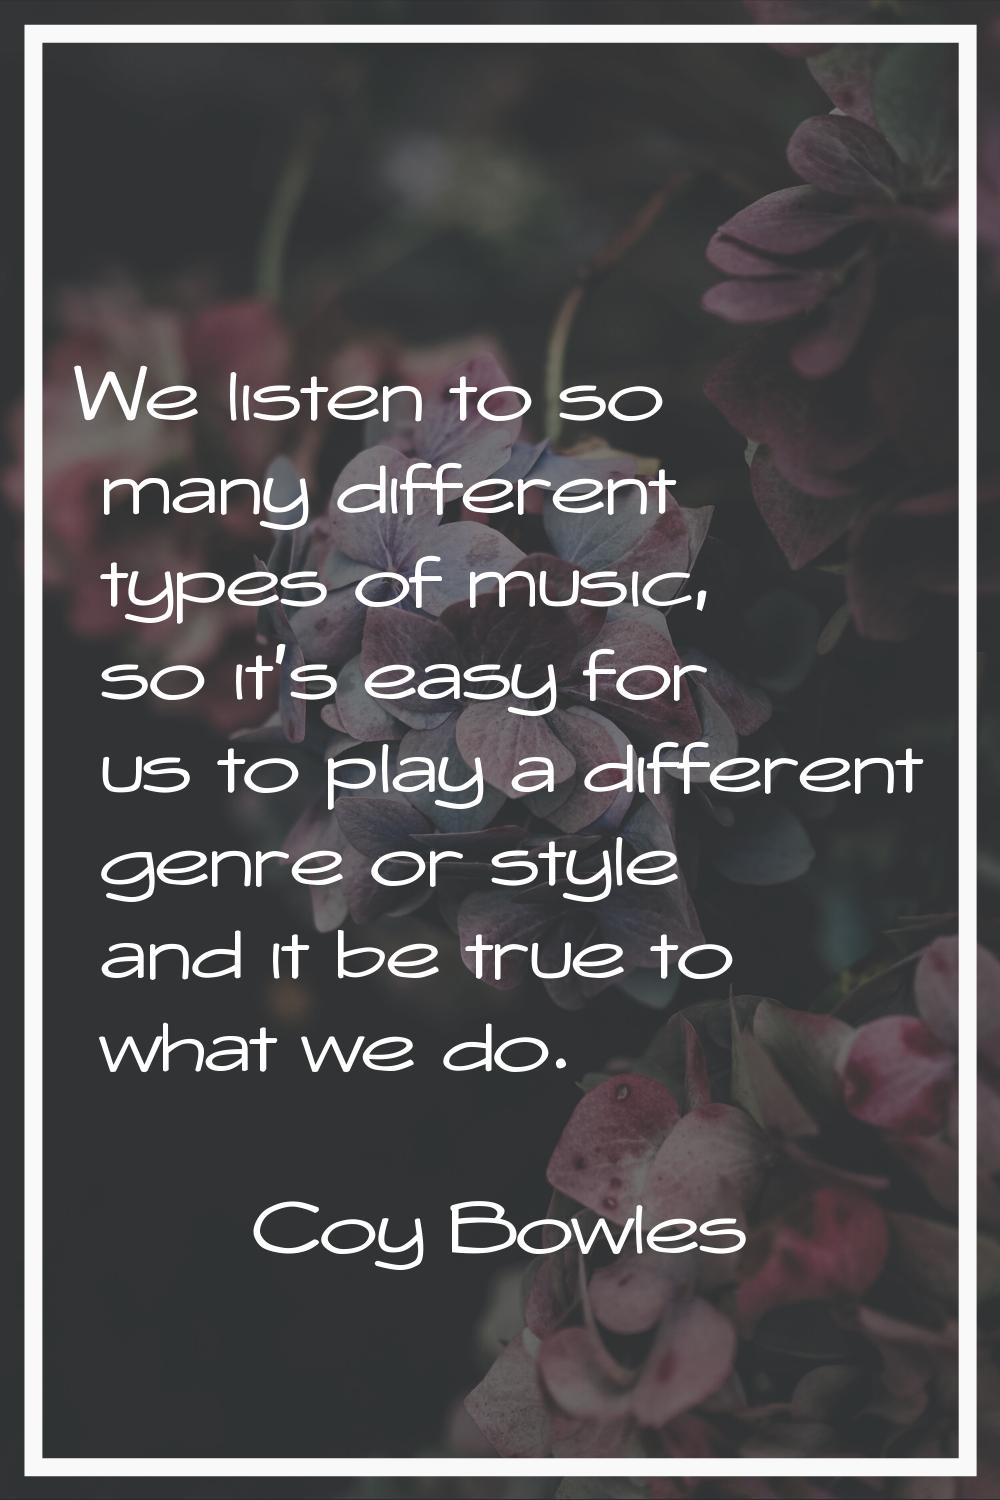 We listen to so many different types of music, so it's easy for us to play a different genre or sty